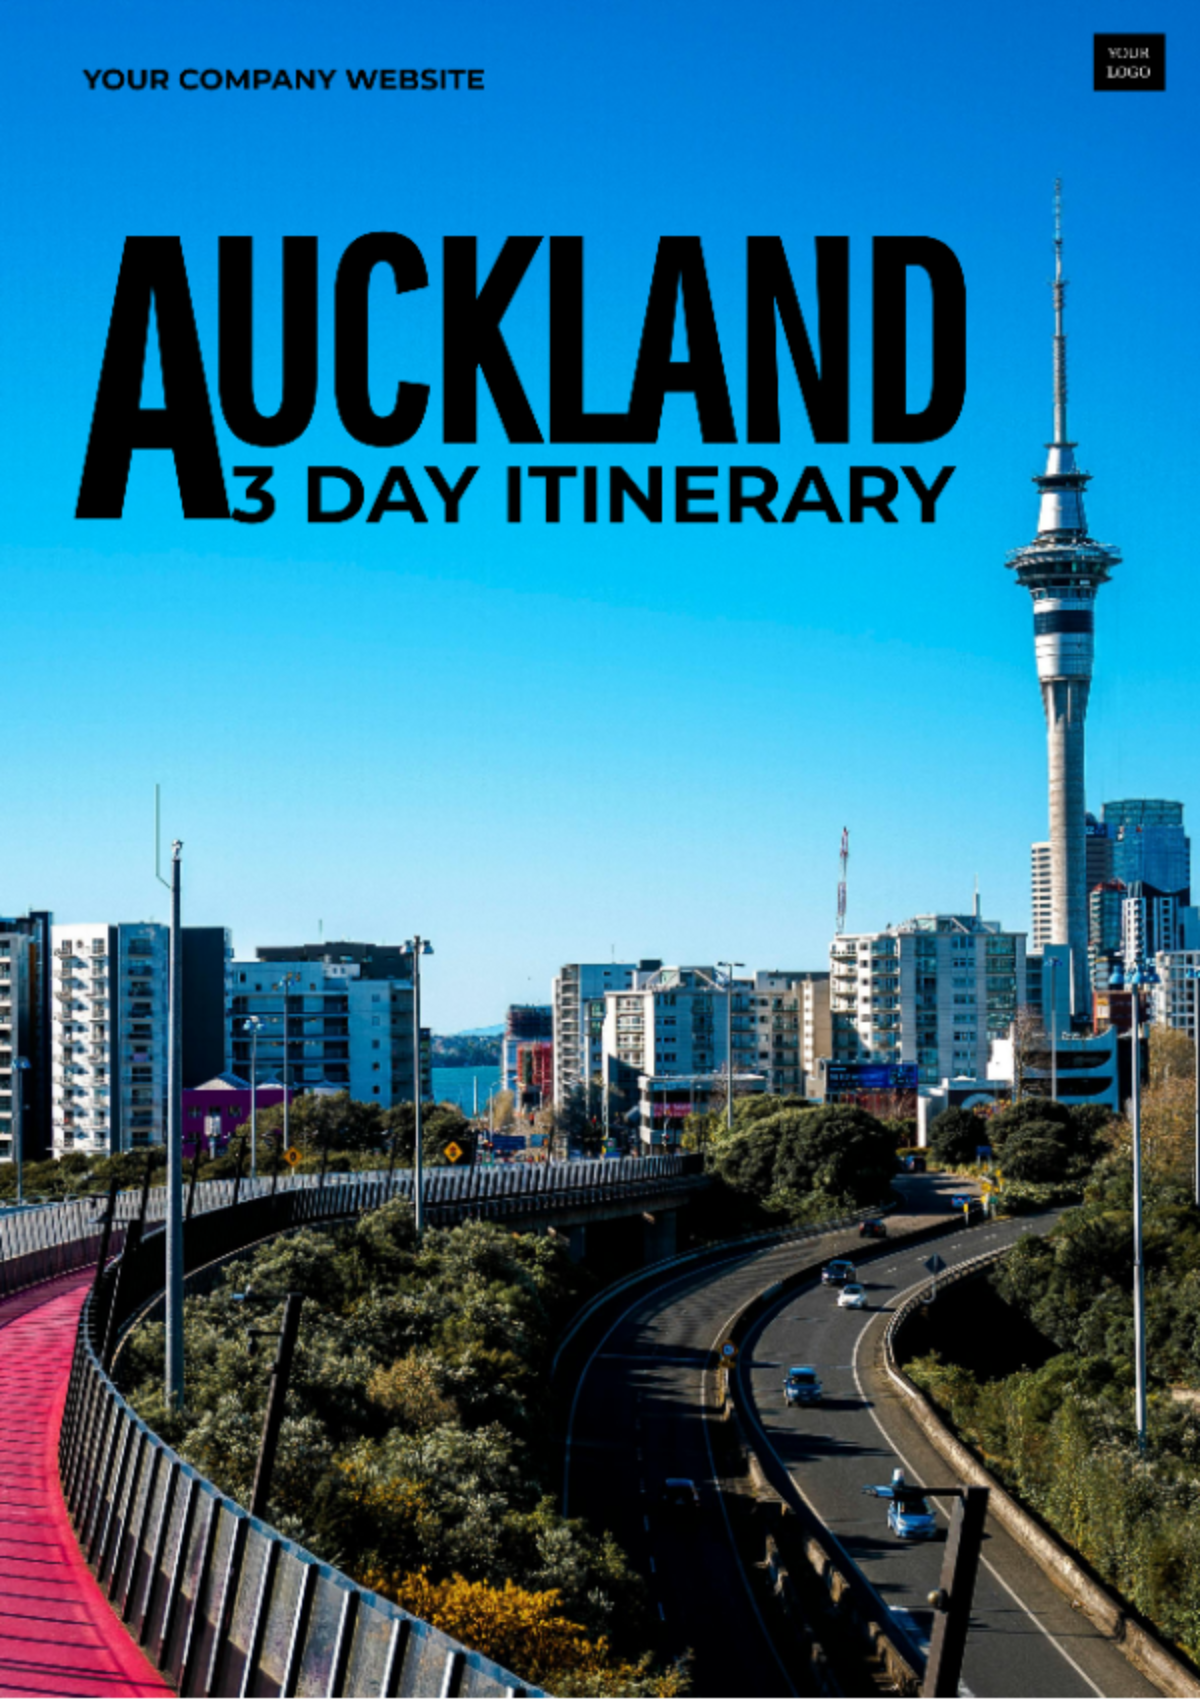 3 Day Auckland Itinerary Template